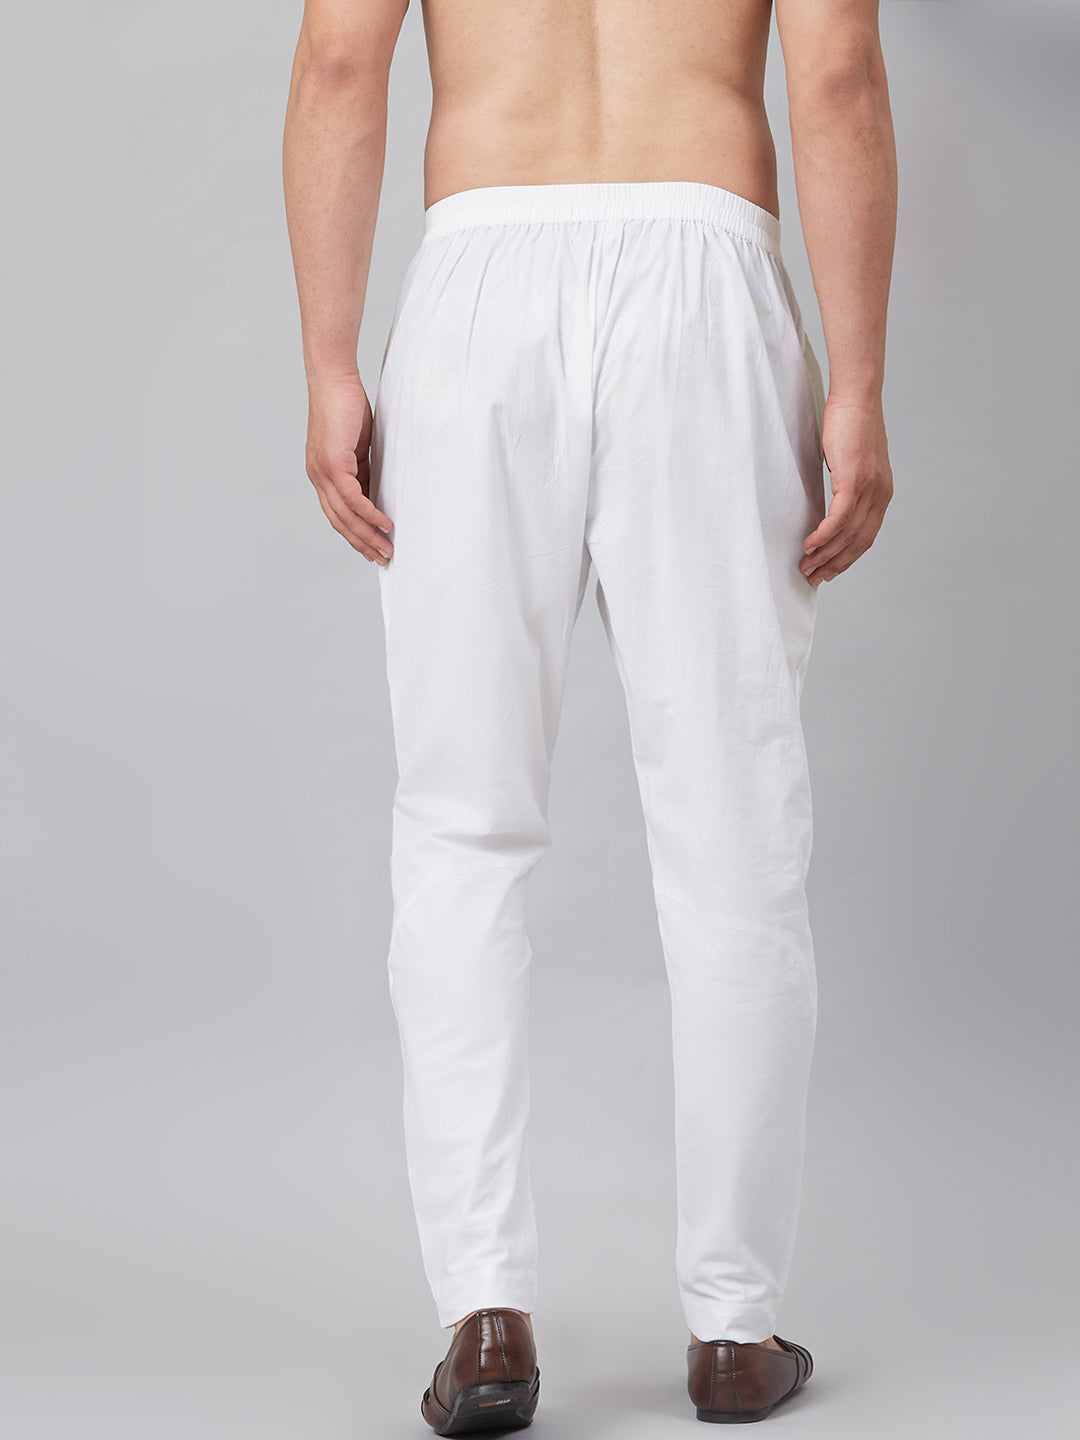 Combo Pack of 2: White Solid Cotton Pyjama and Cotton Trouser